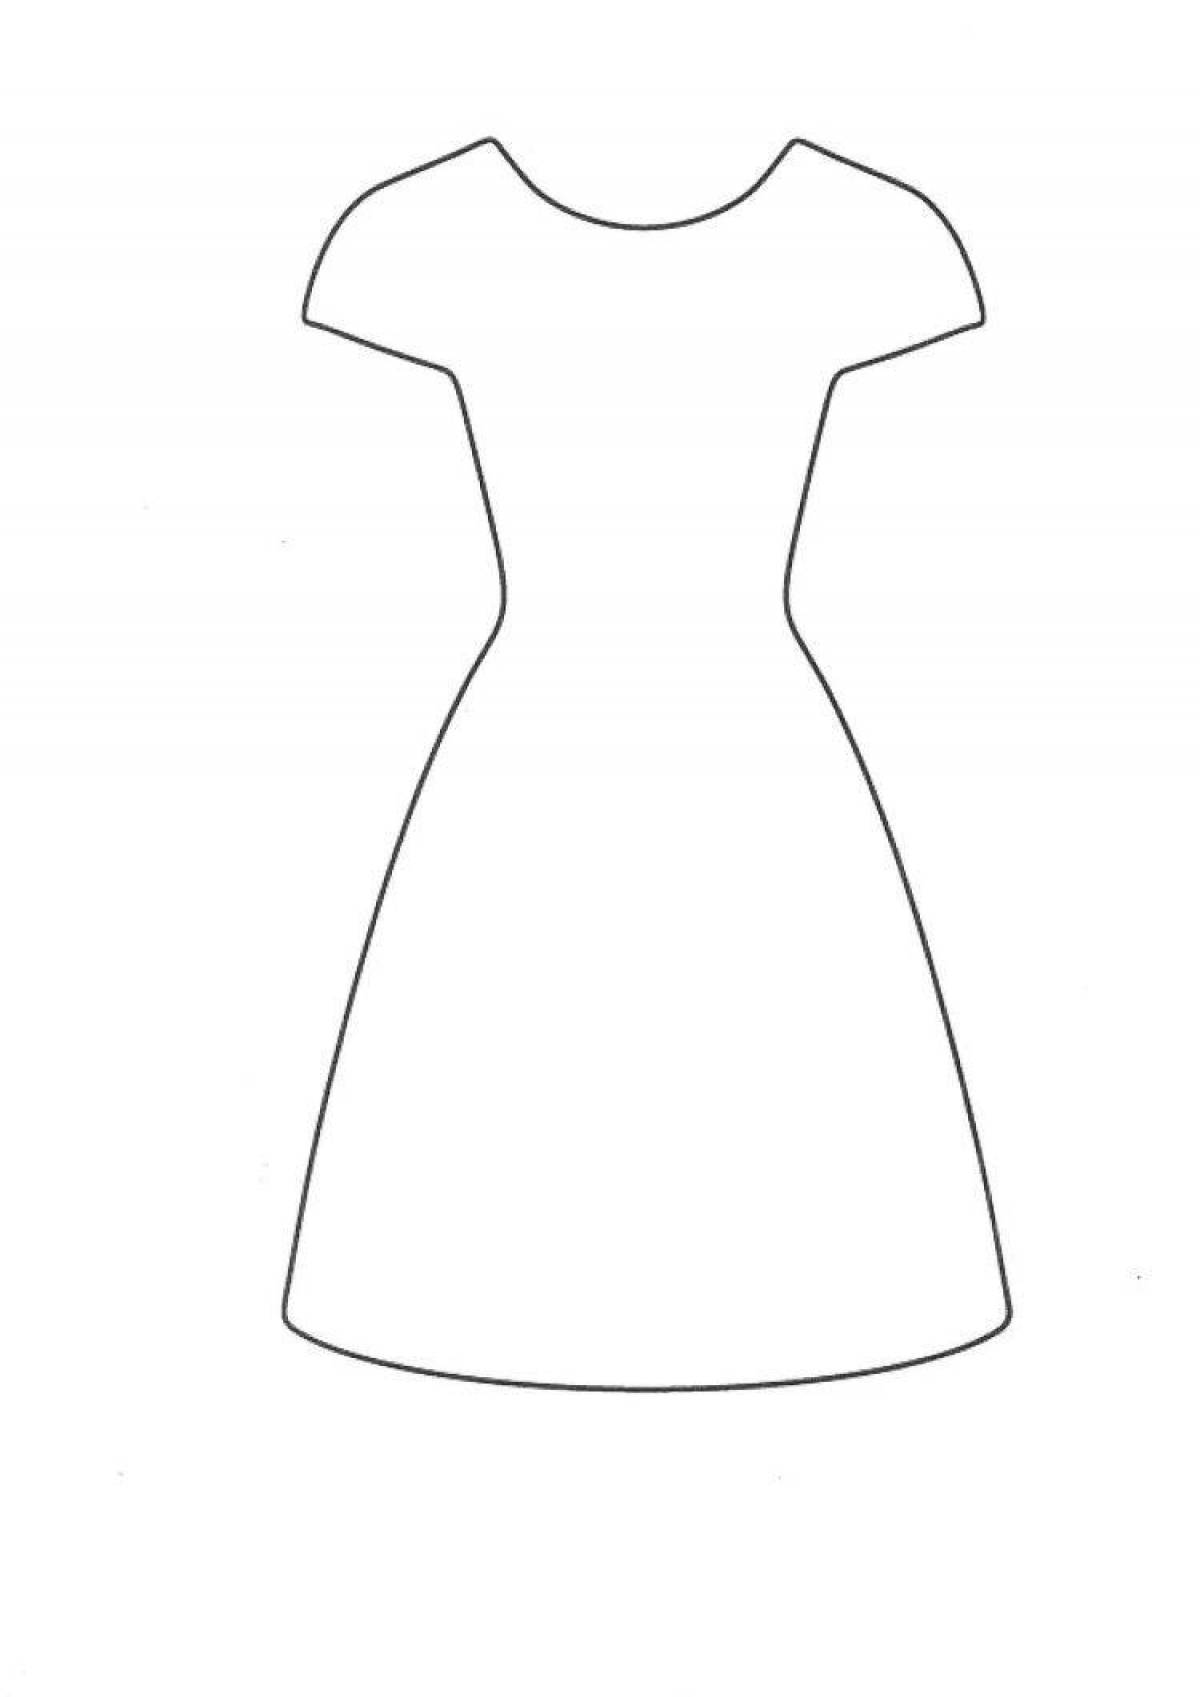 Artistic dress coloring page